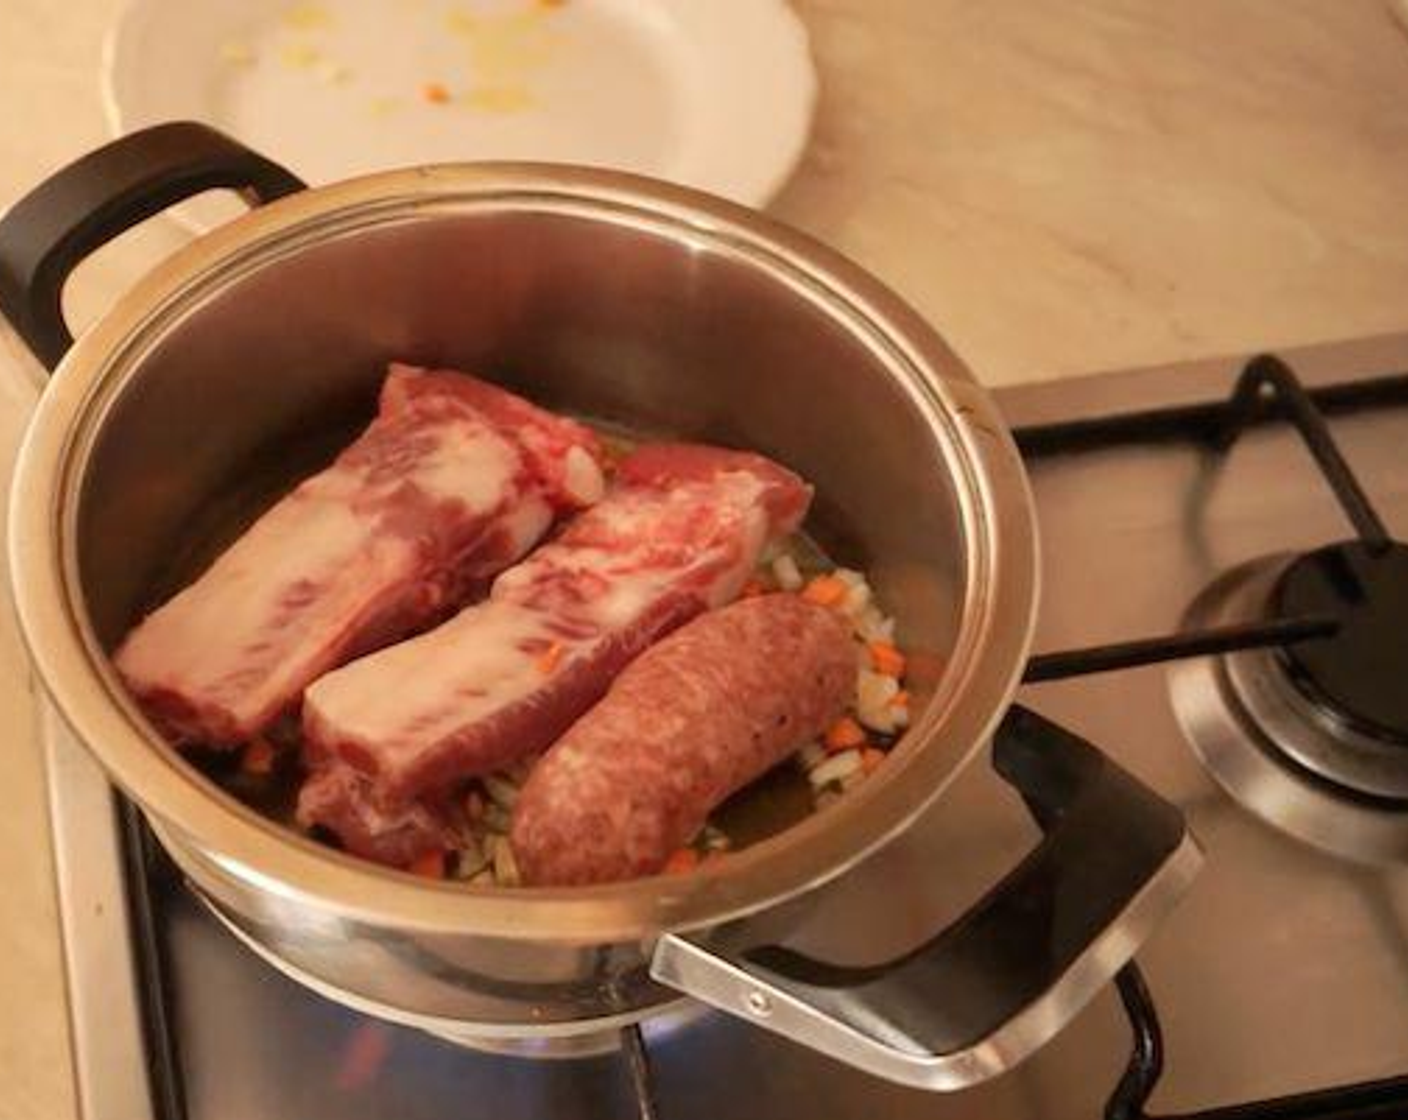 step 2 Leave it to fry for a minute or so before you add a Italian Pork Sausages with Fennel (1) and Pork Ribs (2) to the pot, along with Pork (1 lb). Add the minced pork a little bit at a time so it can brown.